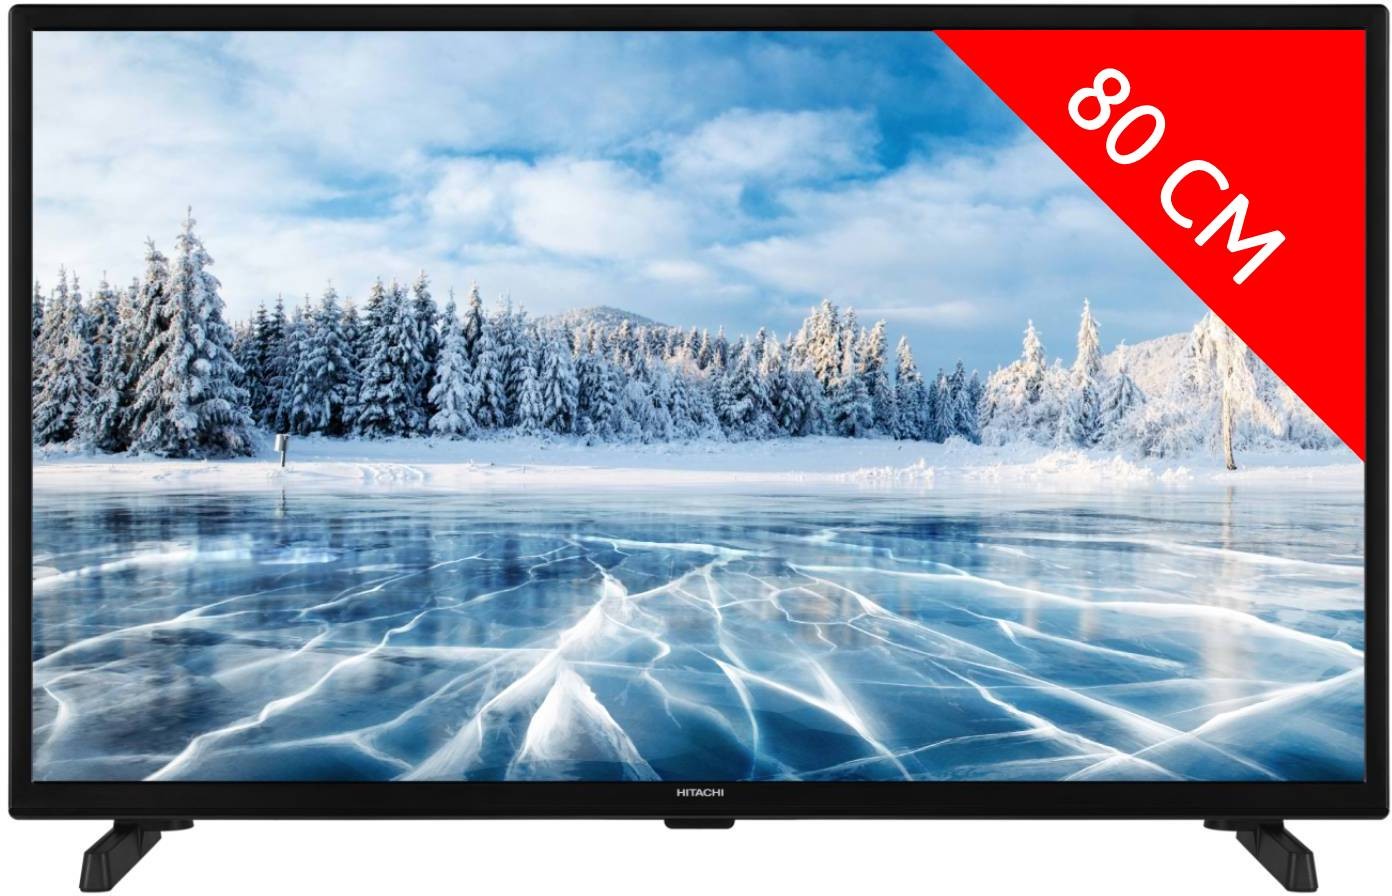 Android TV LED DUAL DL-AND32HD 32 (80cm) HD